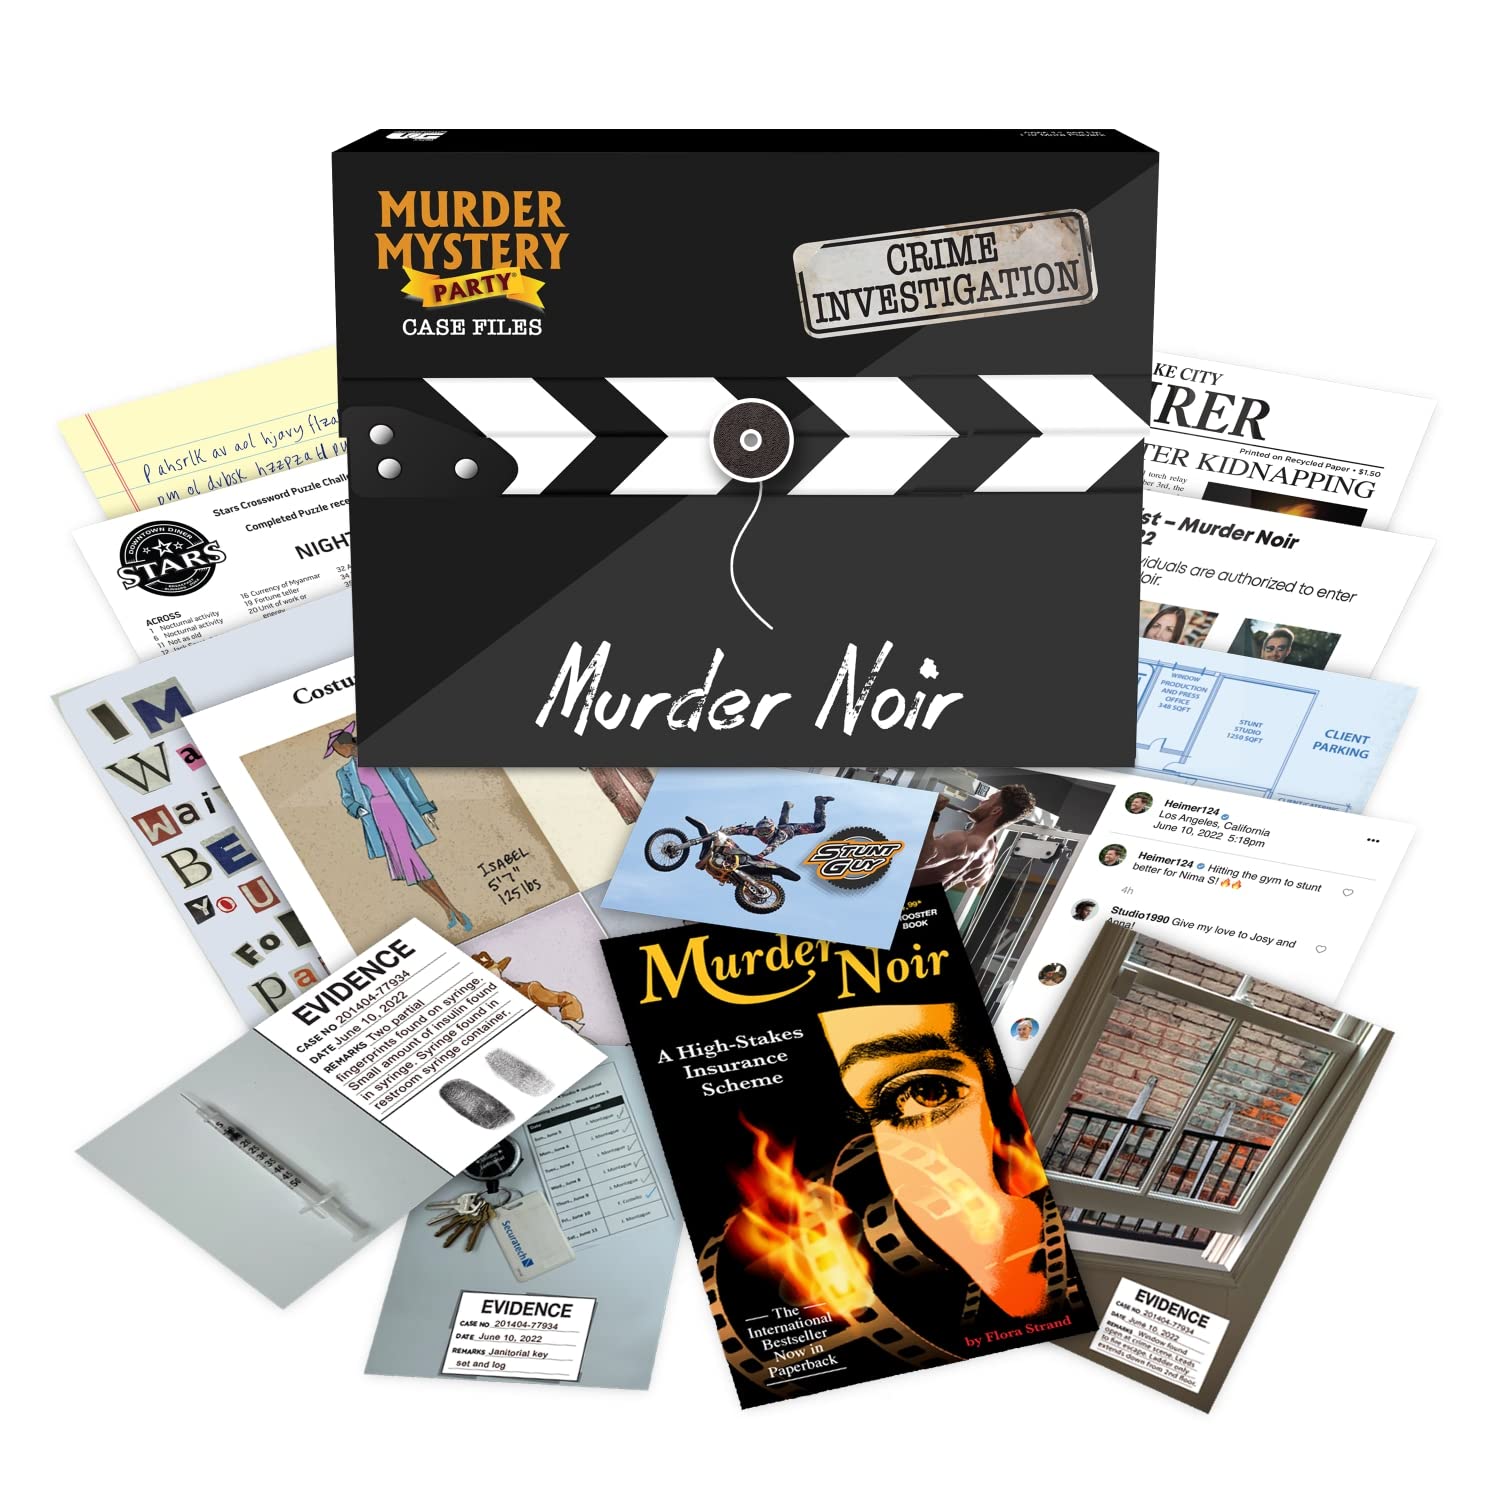 Murder Mystery Party | Case Files Murder Noir Unsolved Mystery Game, for 1 or More Players Ages 14+